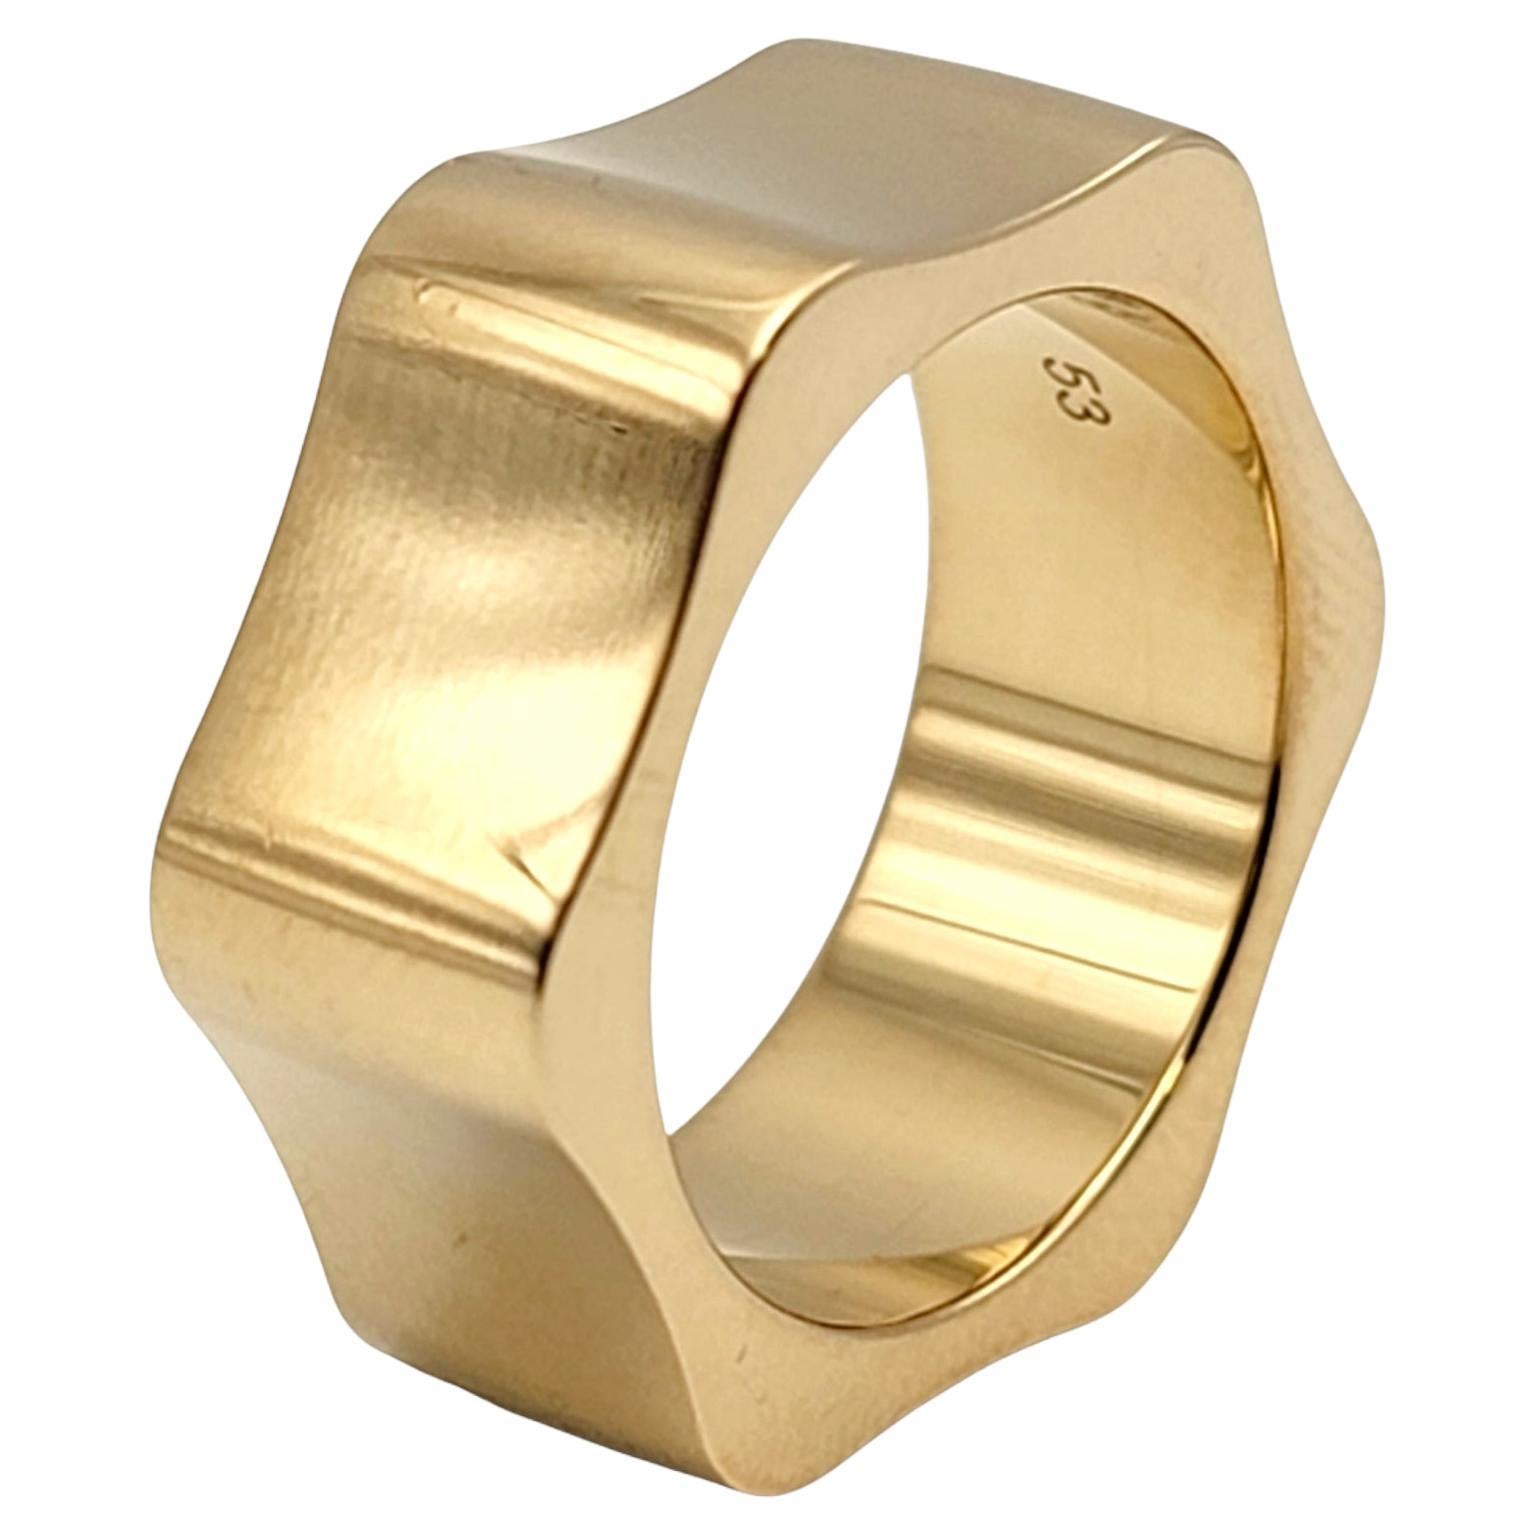 Ring size: 6.5

Stunningly simple yet elegant wide band ring by Montblanc. Made of sleek polished 18 karat gold, the subtle six sided 'star' ring makes a chic statement on the finger with its clean lines, perfect symmetry, and flawless elegance.